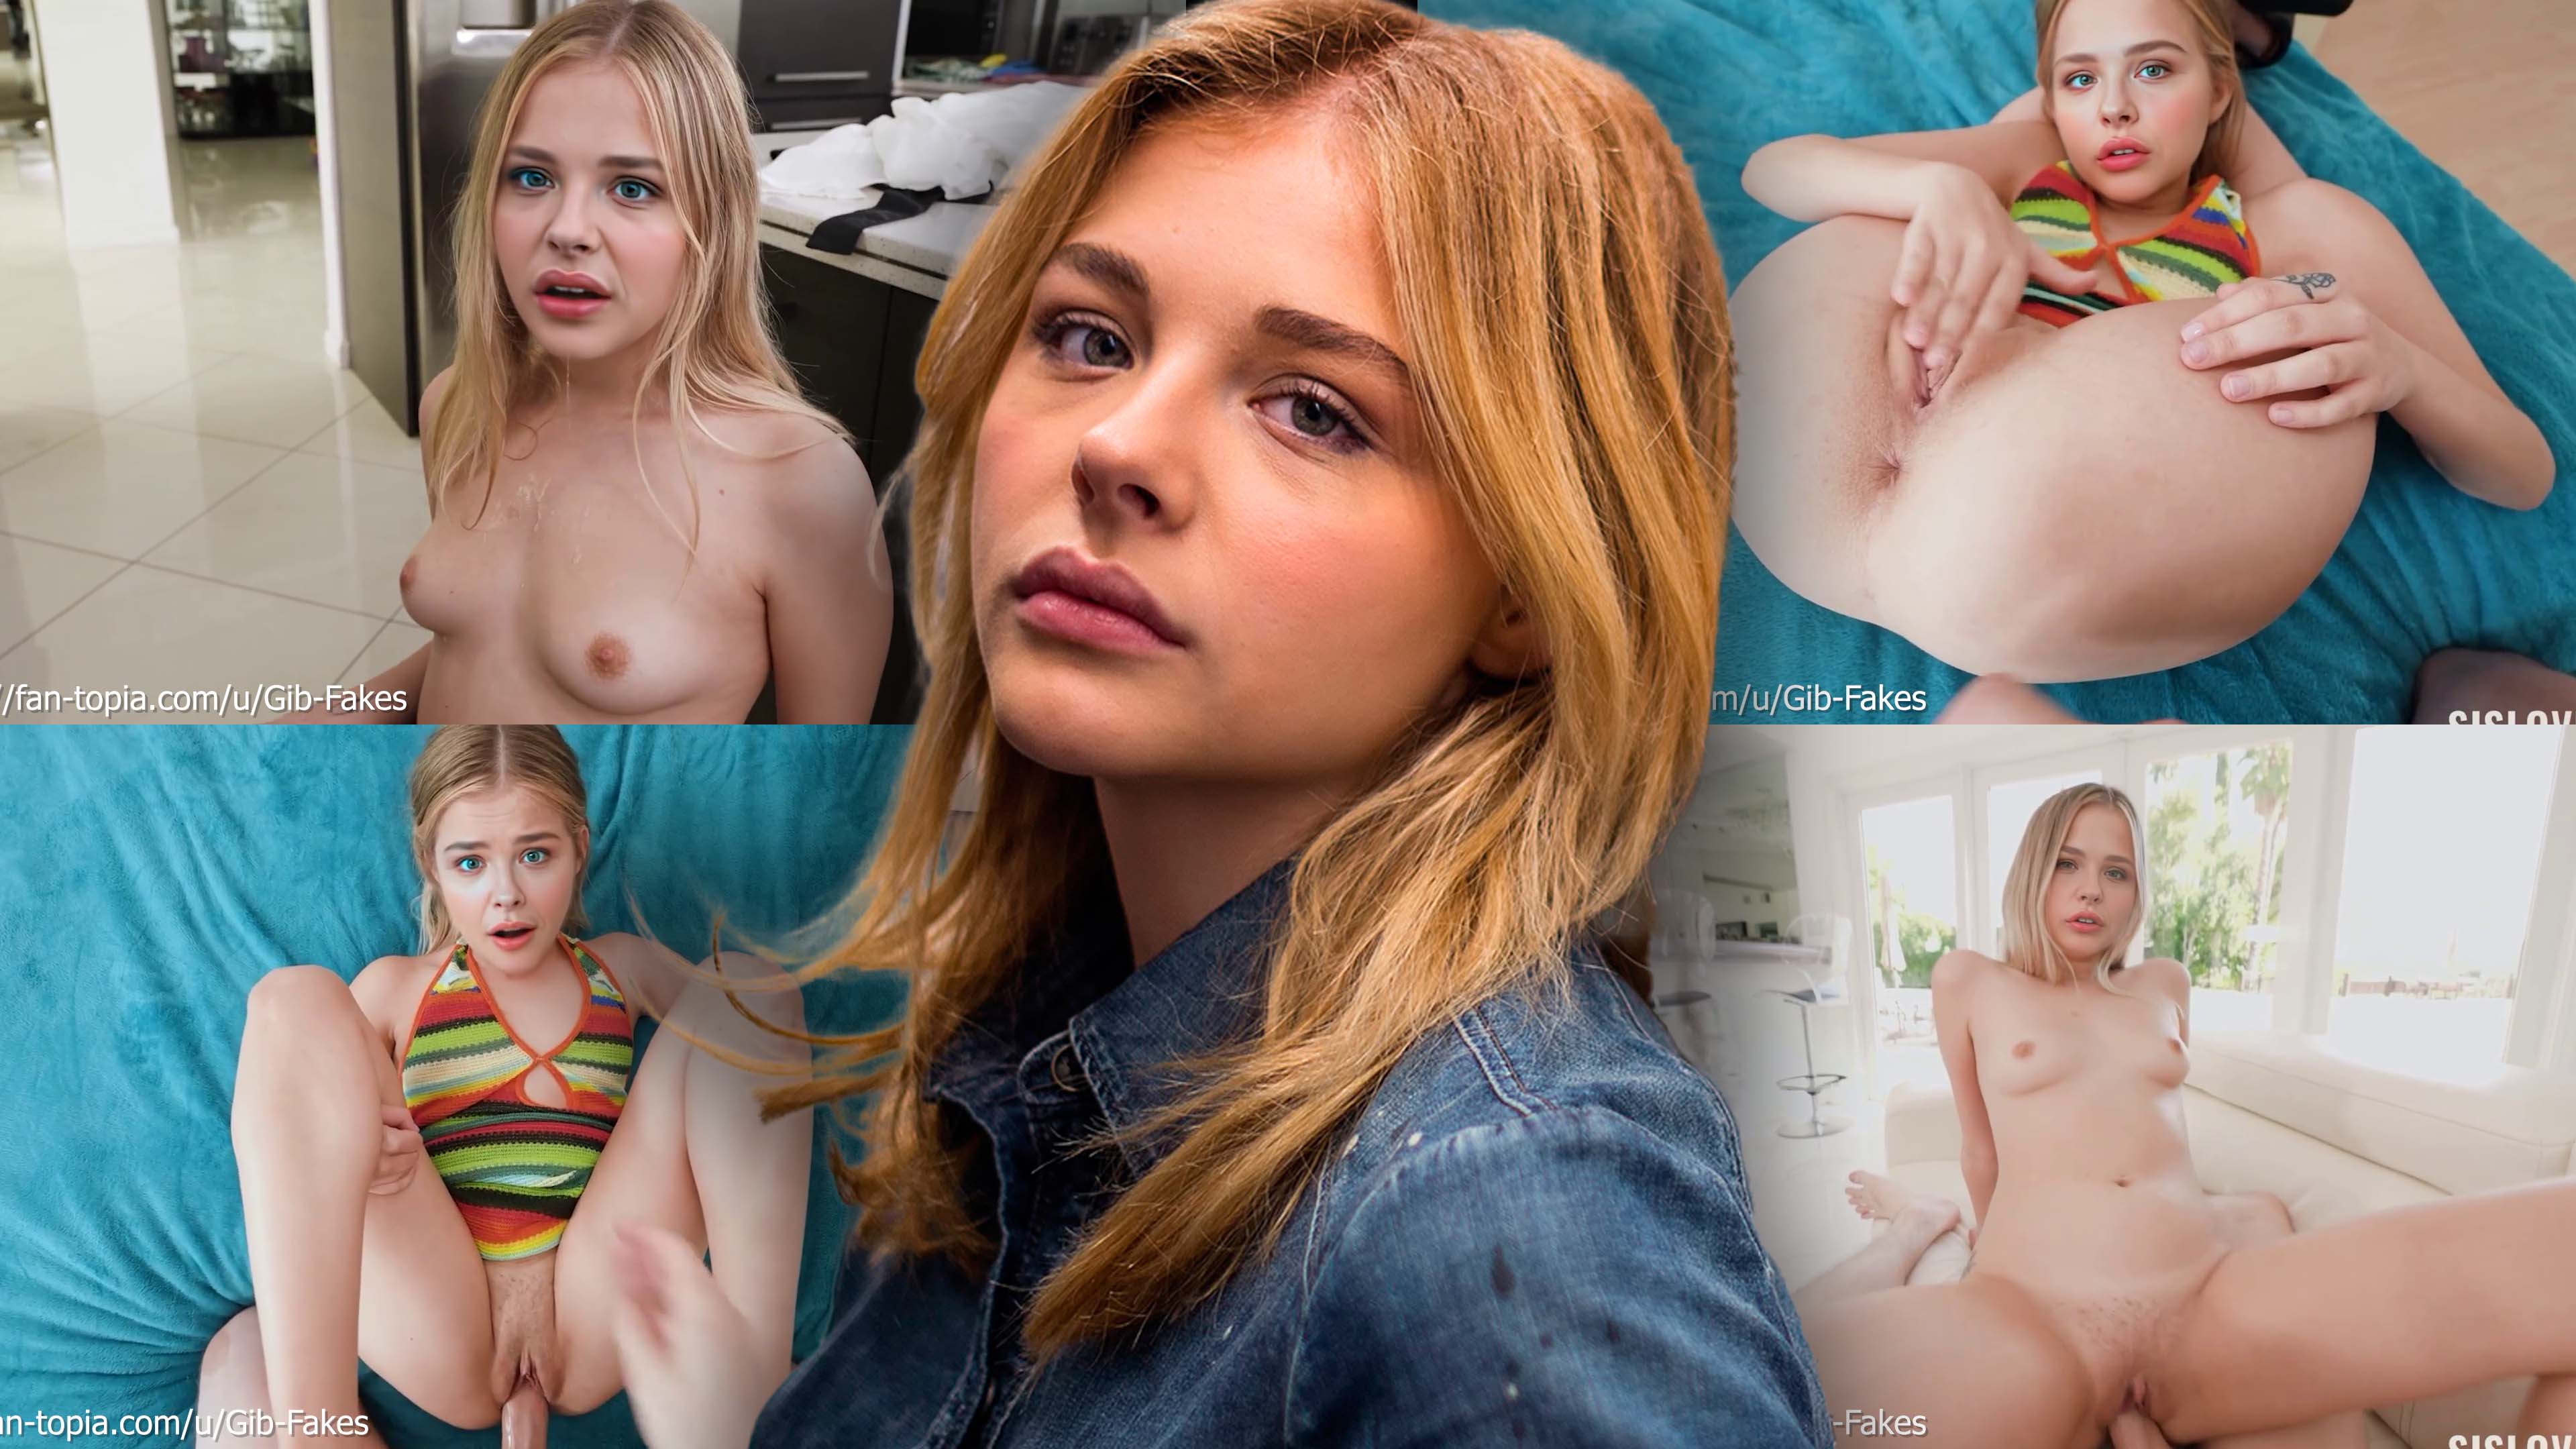 Indulging in chloe moretz fakes: your new obsession